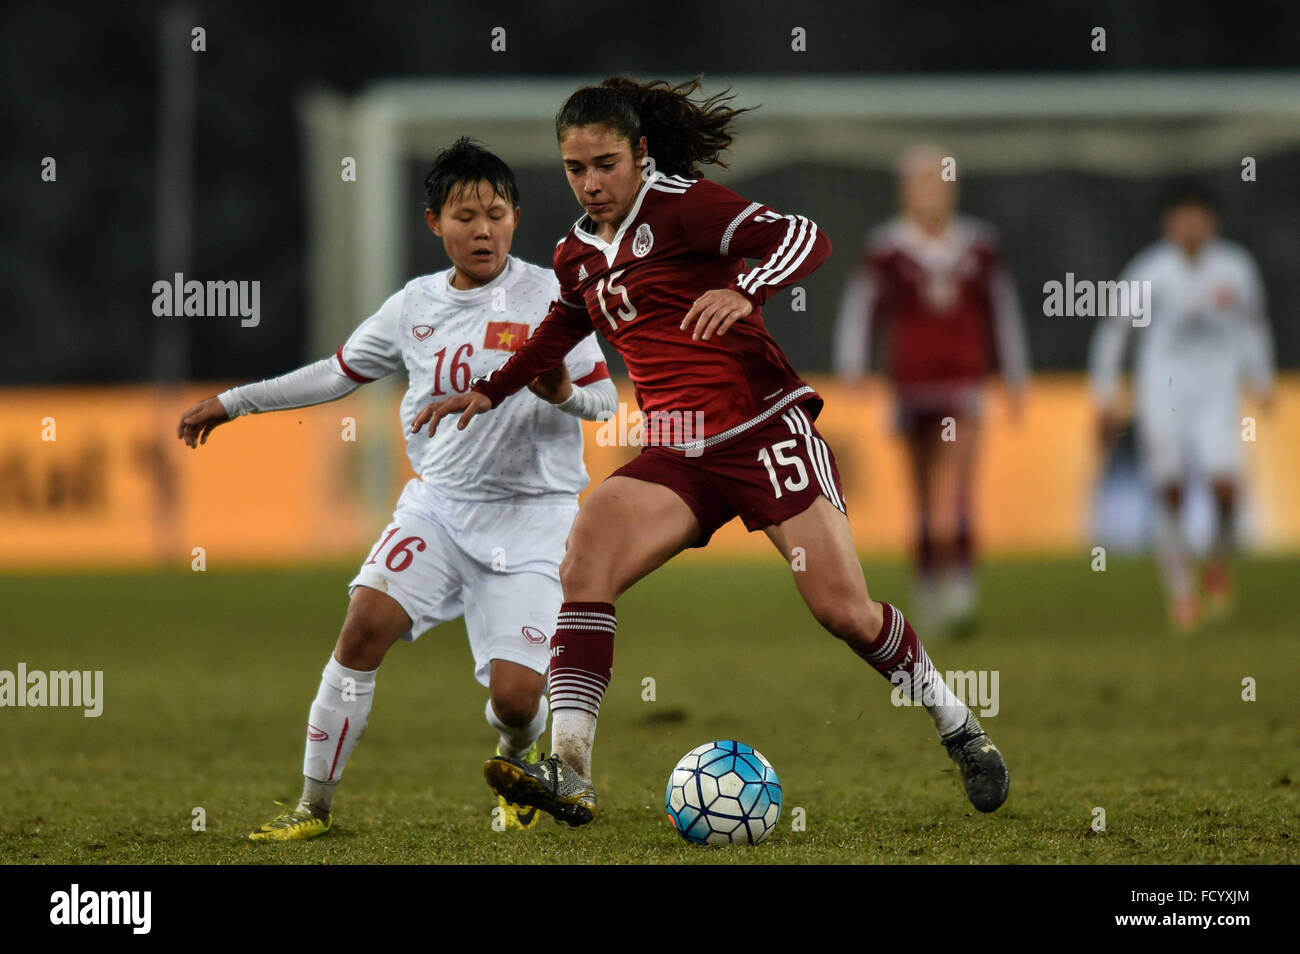 Shenzhen, China's Guangdong Province. 26th Jan, 2016. Monica Flores (R) of Mexico competes during the match against Vietnam at the 2016 Shenzhen Women's Football International Tournament held in Shenzhen, south China's Guangdong Province, on Jan. 26, 2016. Mexico won 1-0. © Mao Siqian/Xinhua/Alamy Live News Stock Photo